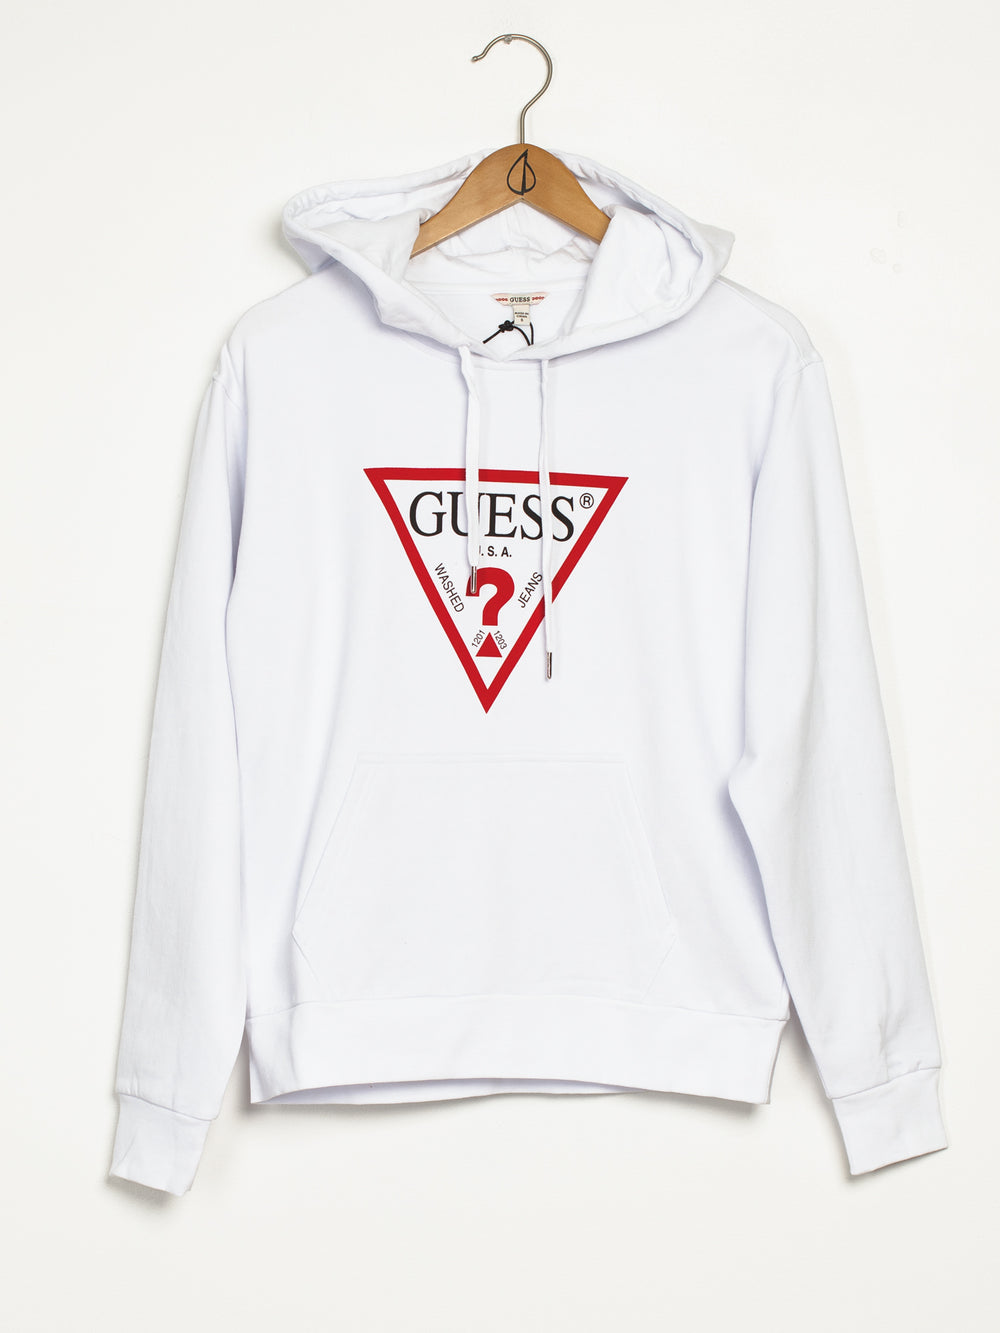 GUESS CLASSIC TRIANGLE LOGO LONG SLEEVE HOODIE  - CLEARANCE